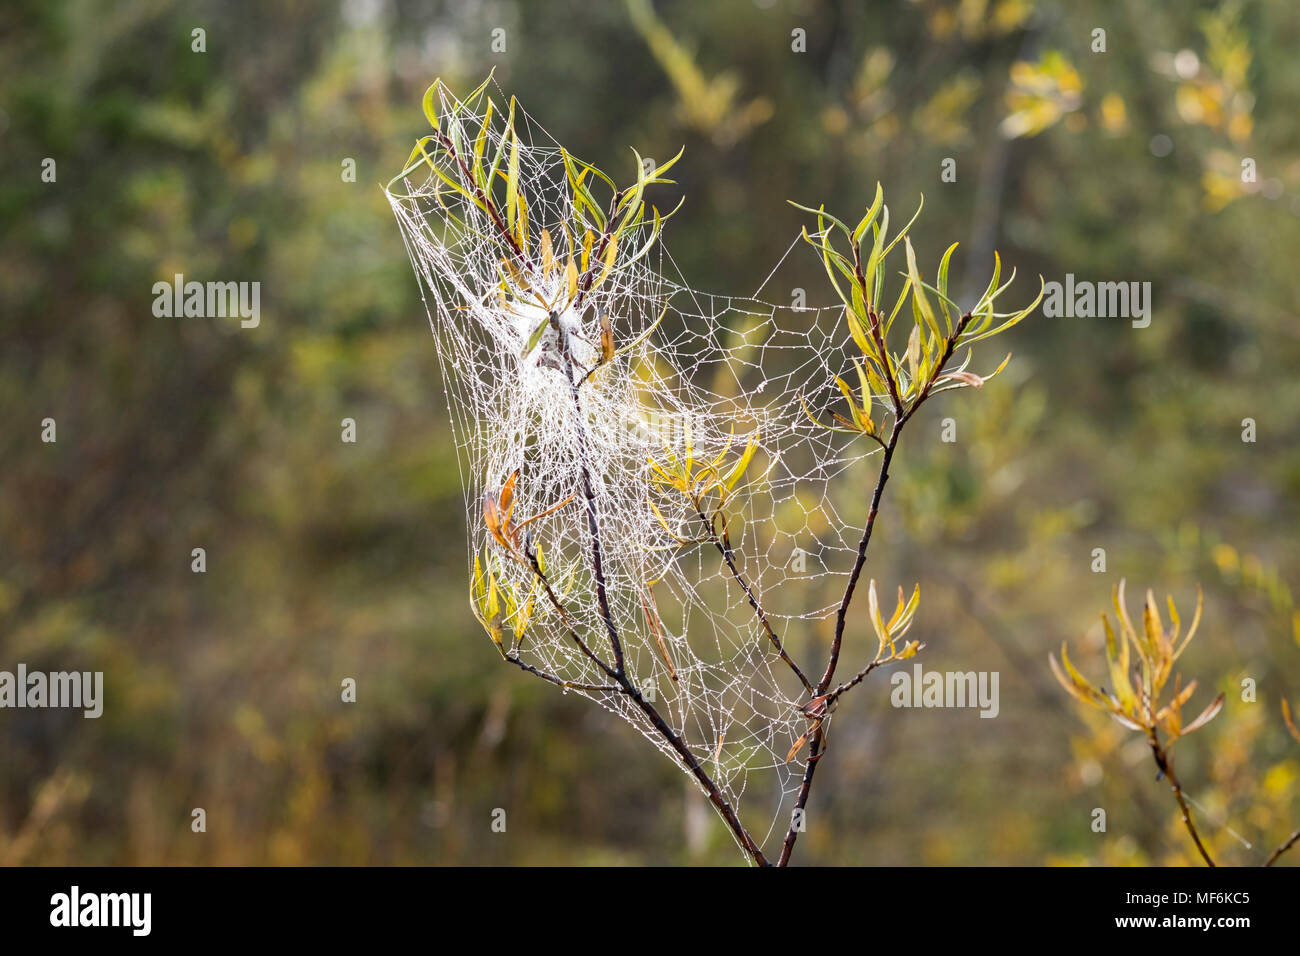 Spiderweb with dew drops in willow branch, Upper Bavaria, Bavaria, Germany Stock Photo